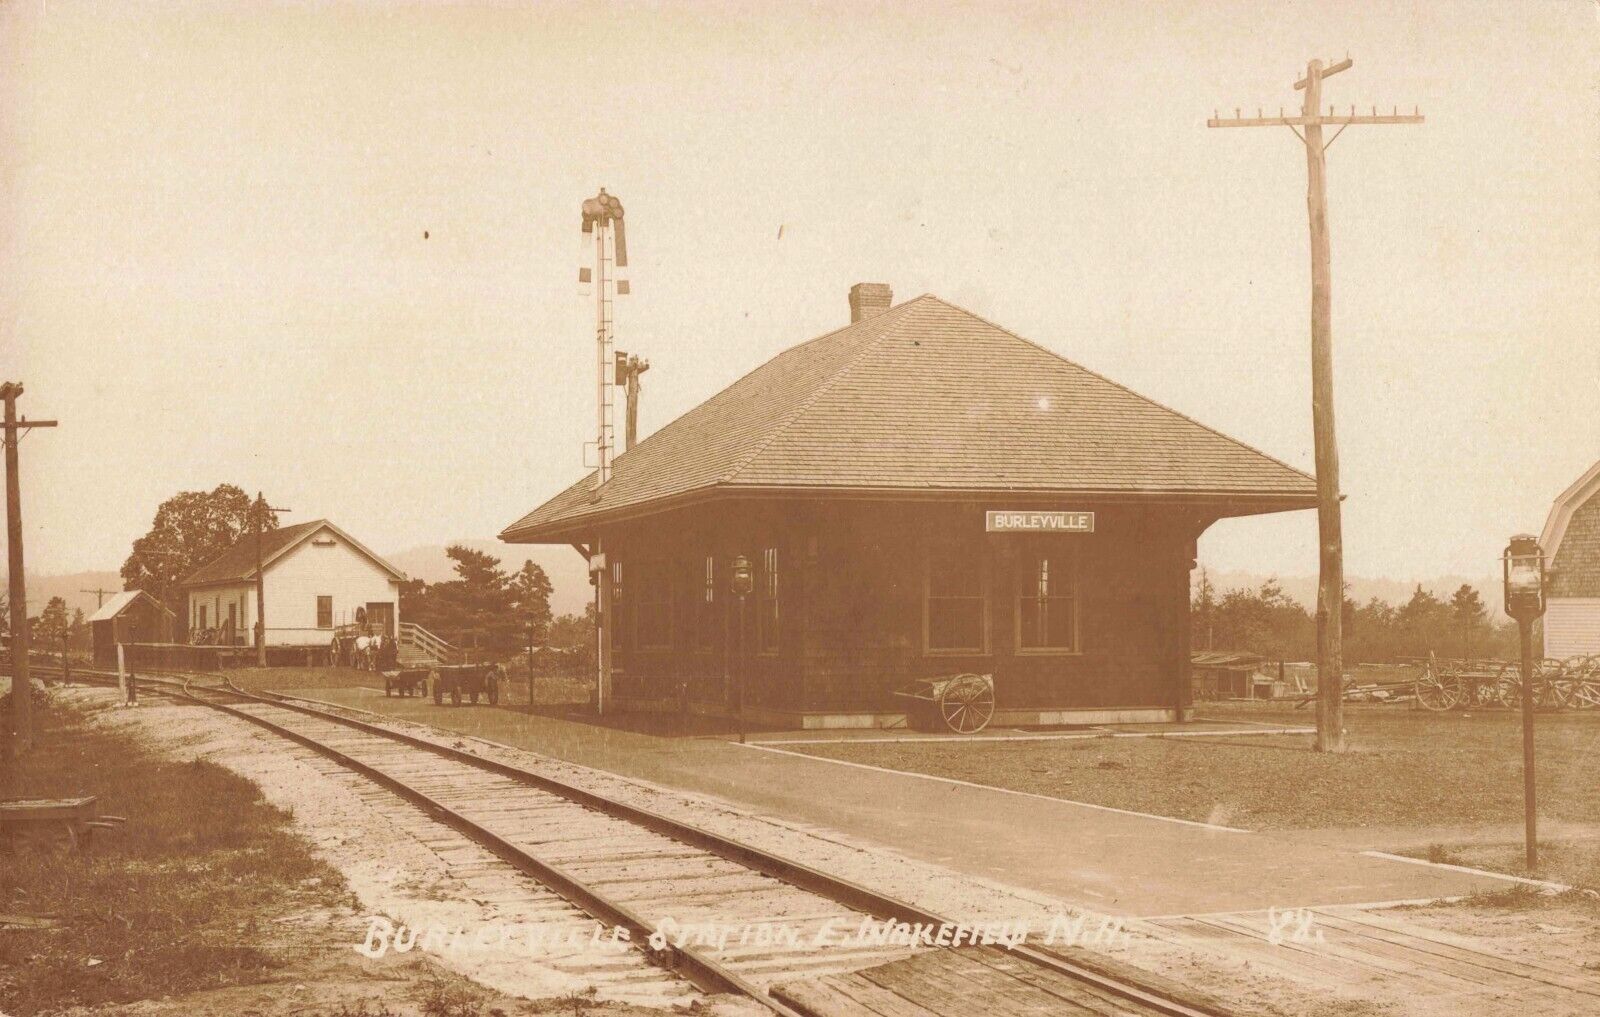 Burleyville Railroad Station Depot East Wakefield New Hampshire c1910 Real Photo